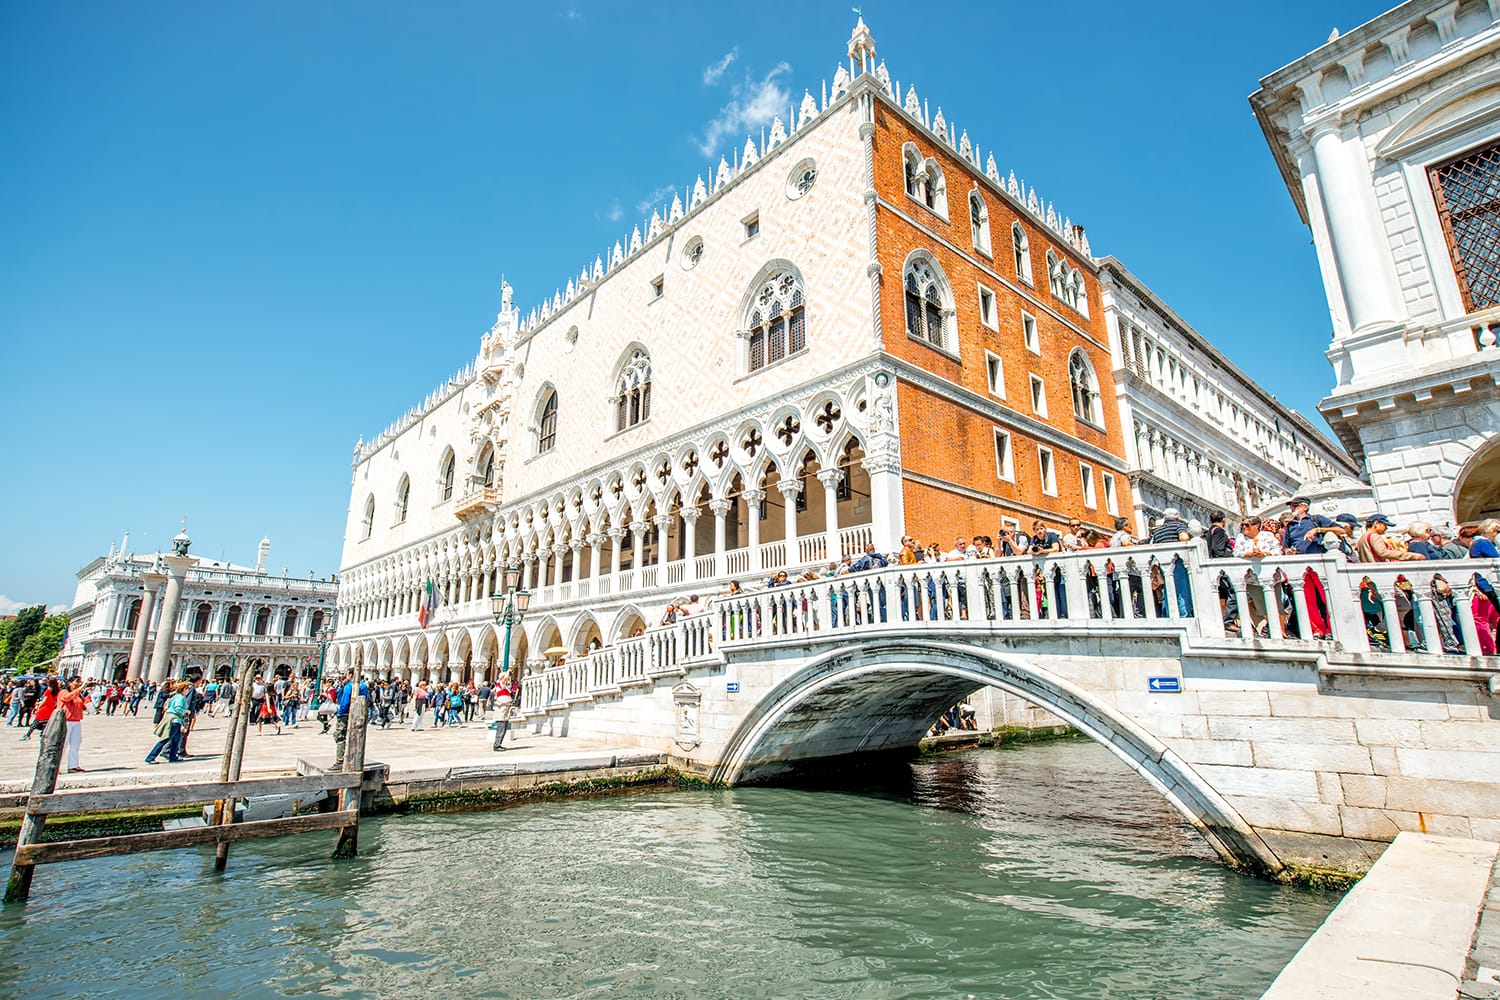 View on Doges palace with tourists walk on the bridge and San Marco square in Venice, Italy